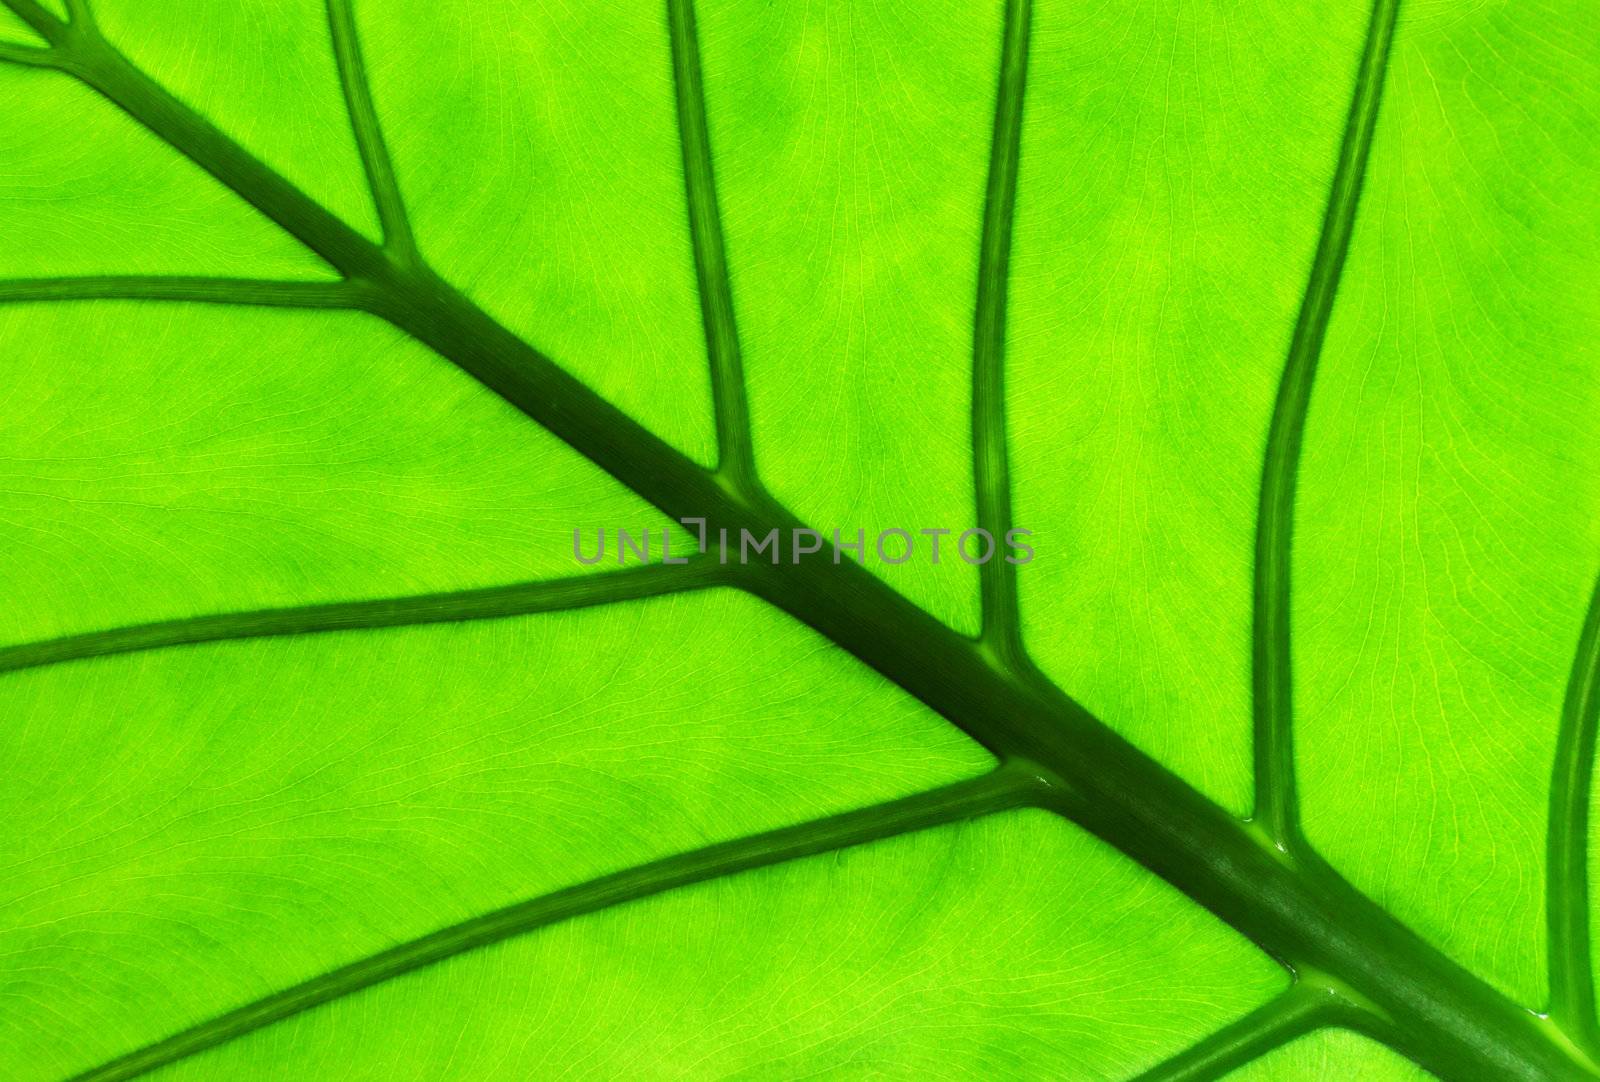 Alocasia leaf with backlight  by whitechild